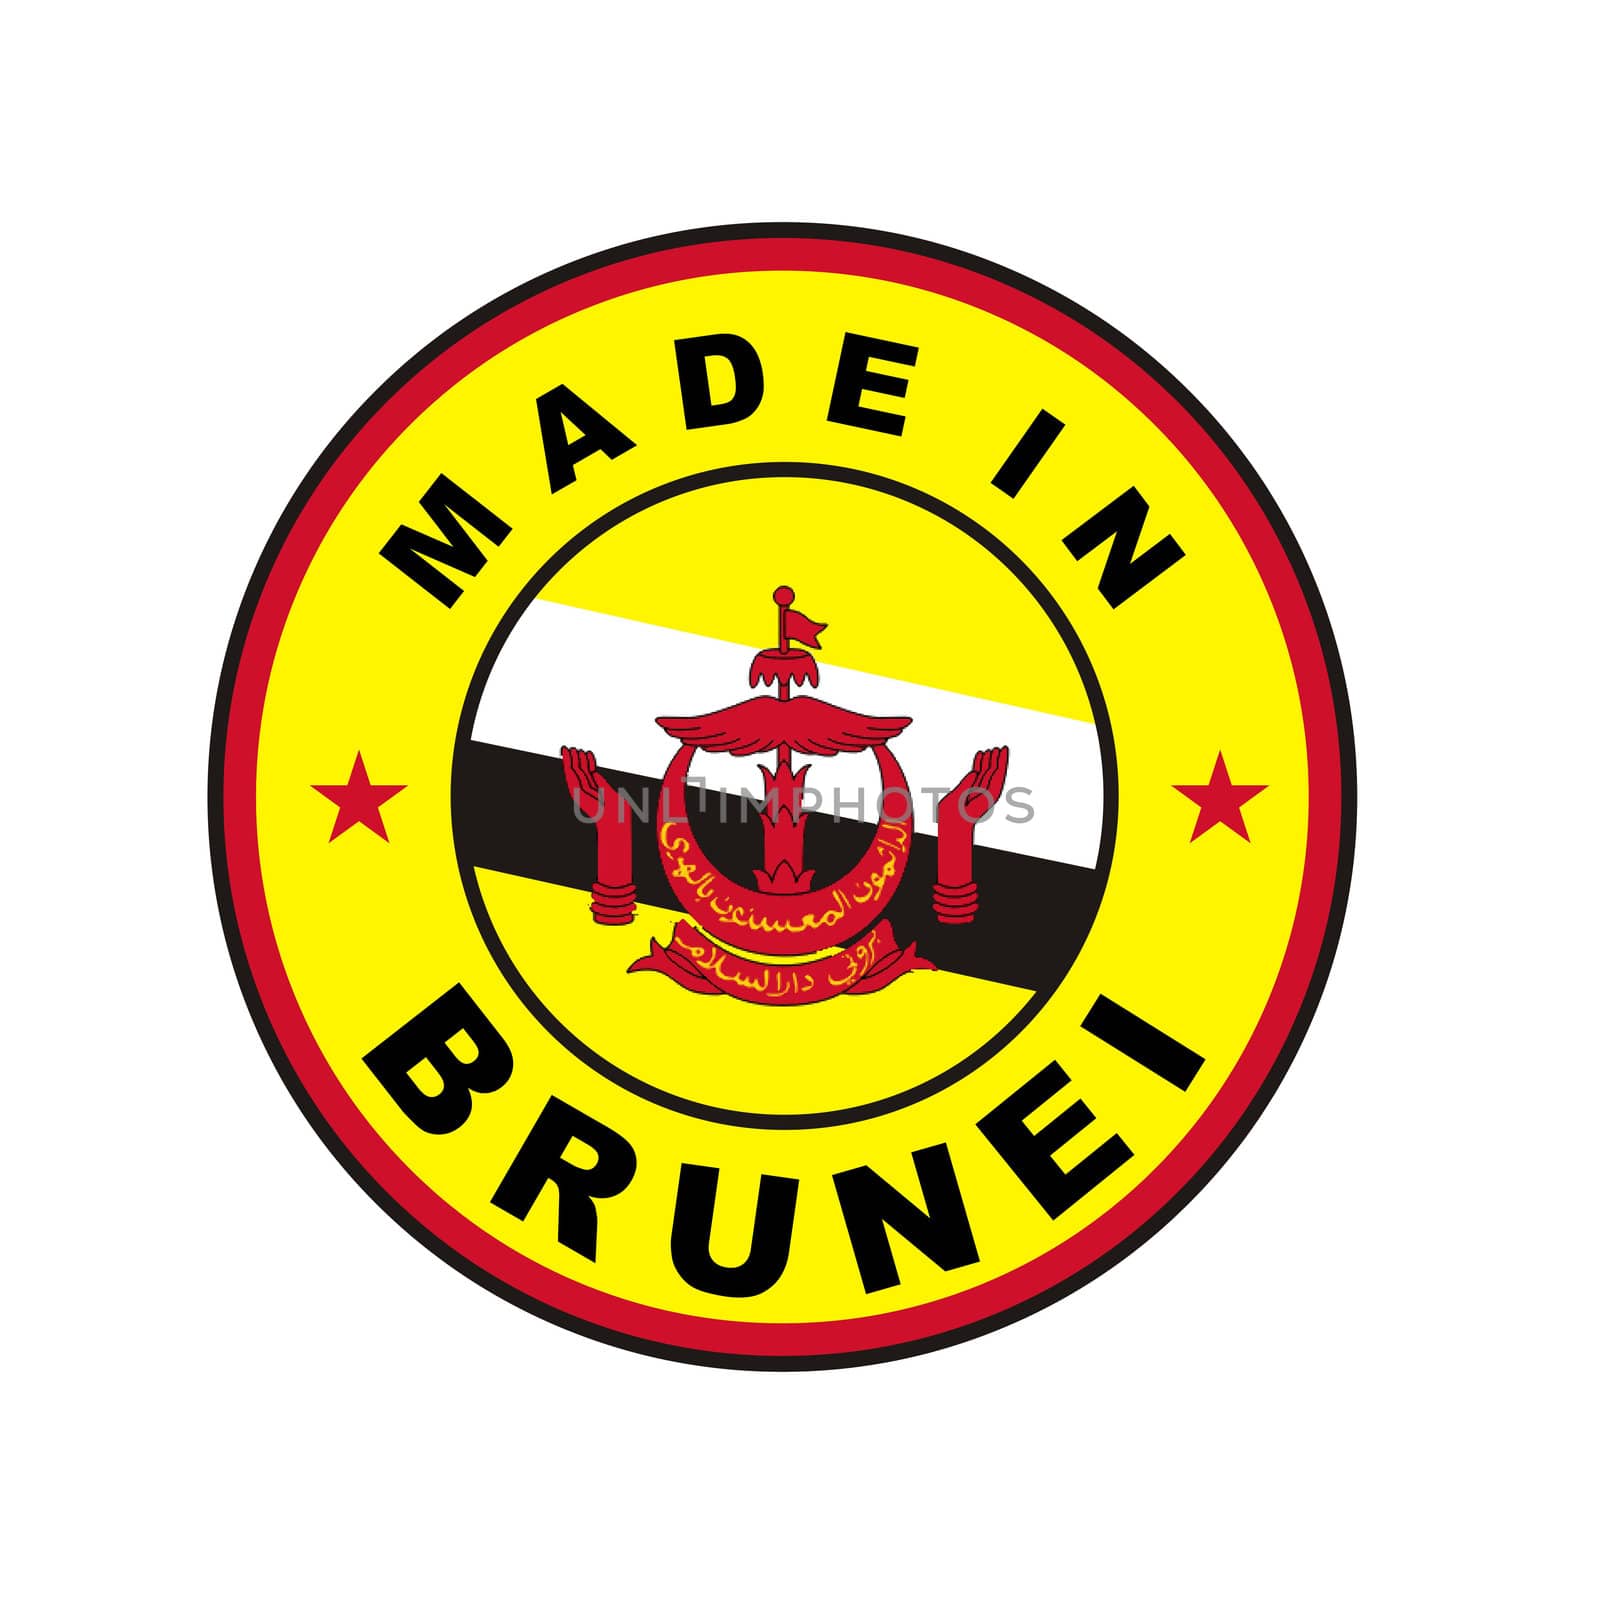 made in brunei by tony4urban